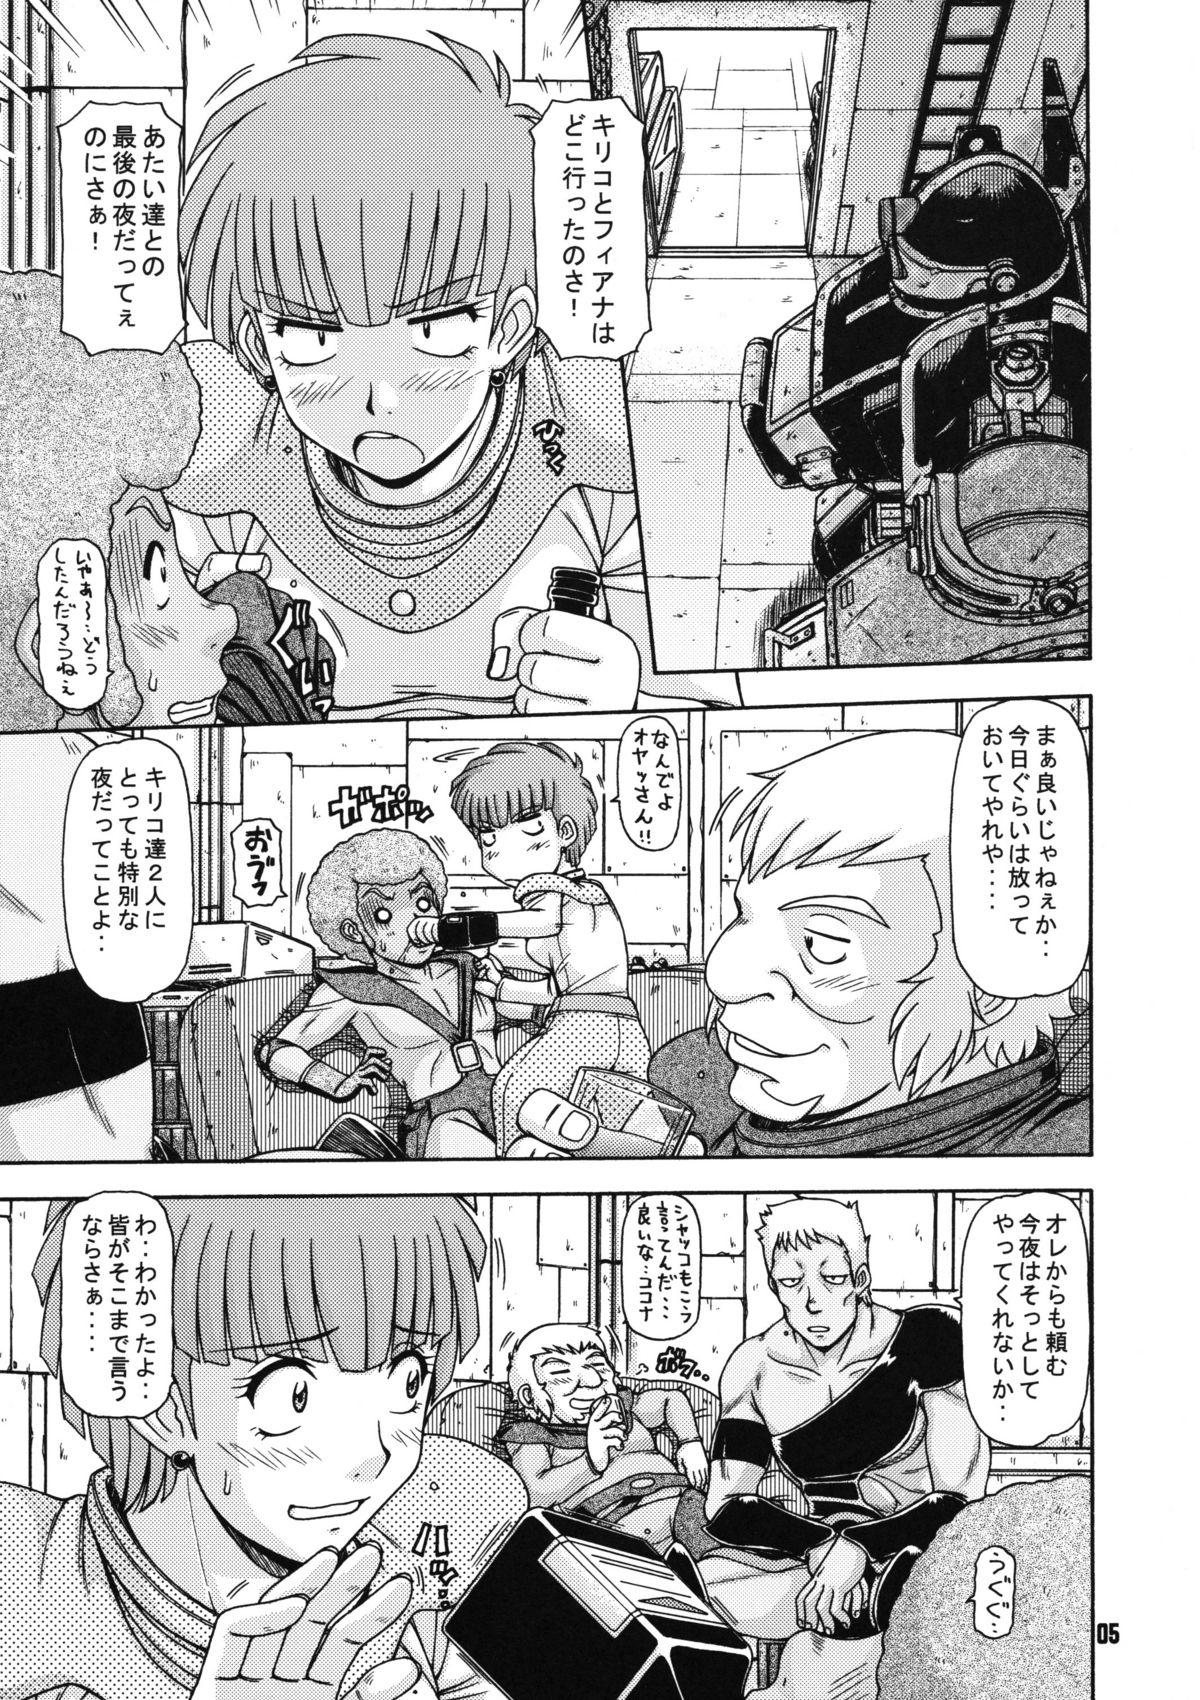 Cfnm RED MUFFLER Vo - Armored trooper votoms Amateur Blow Job - Page 4